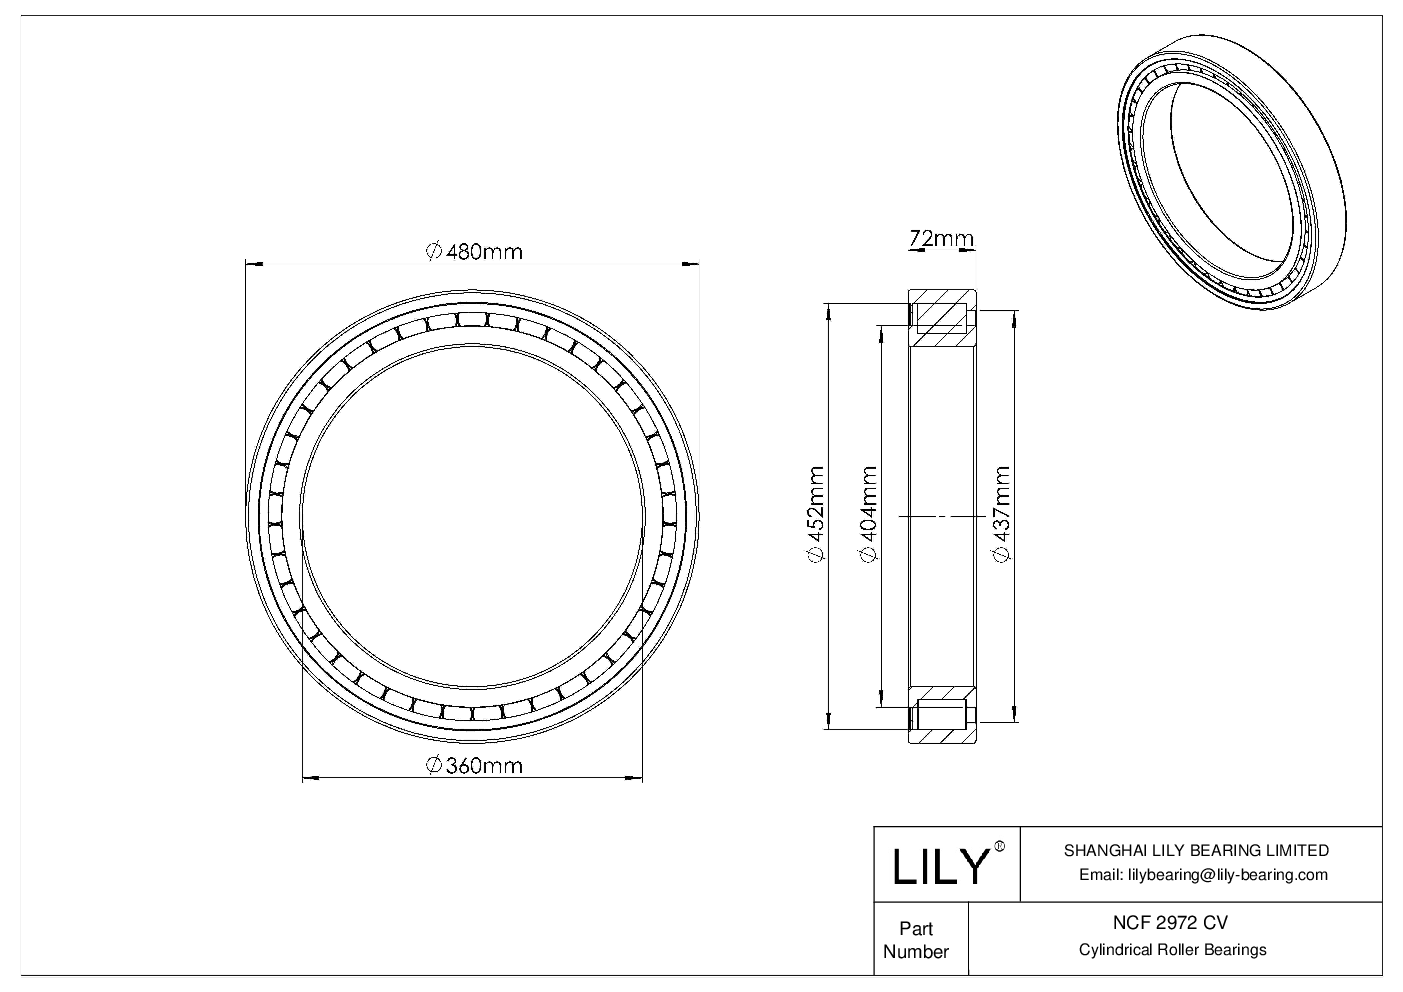 NCF 2972 CV Single Row Full Complement Cylindrical Roller Bearings cad drawing